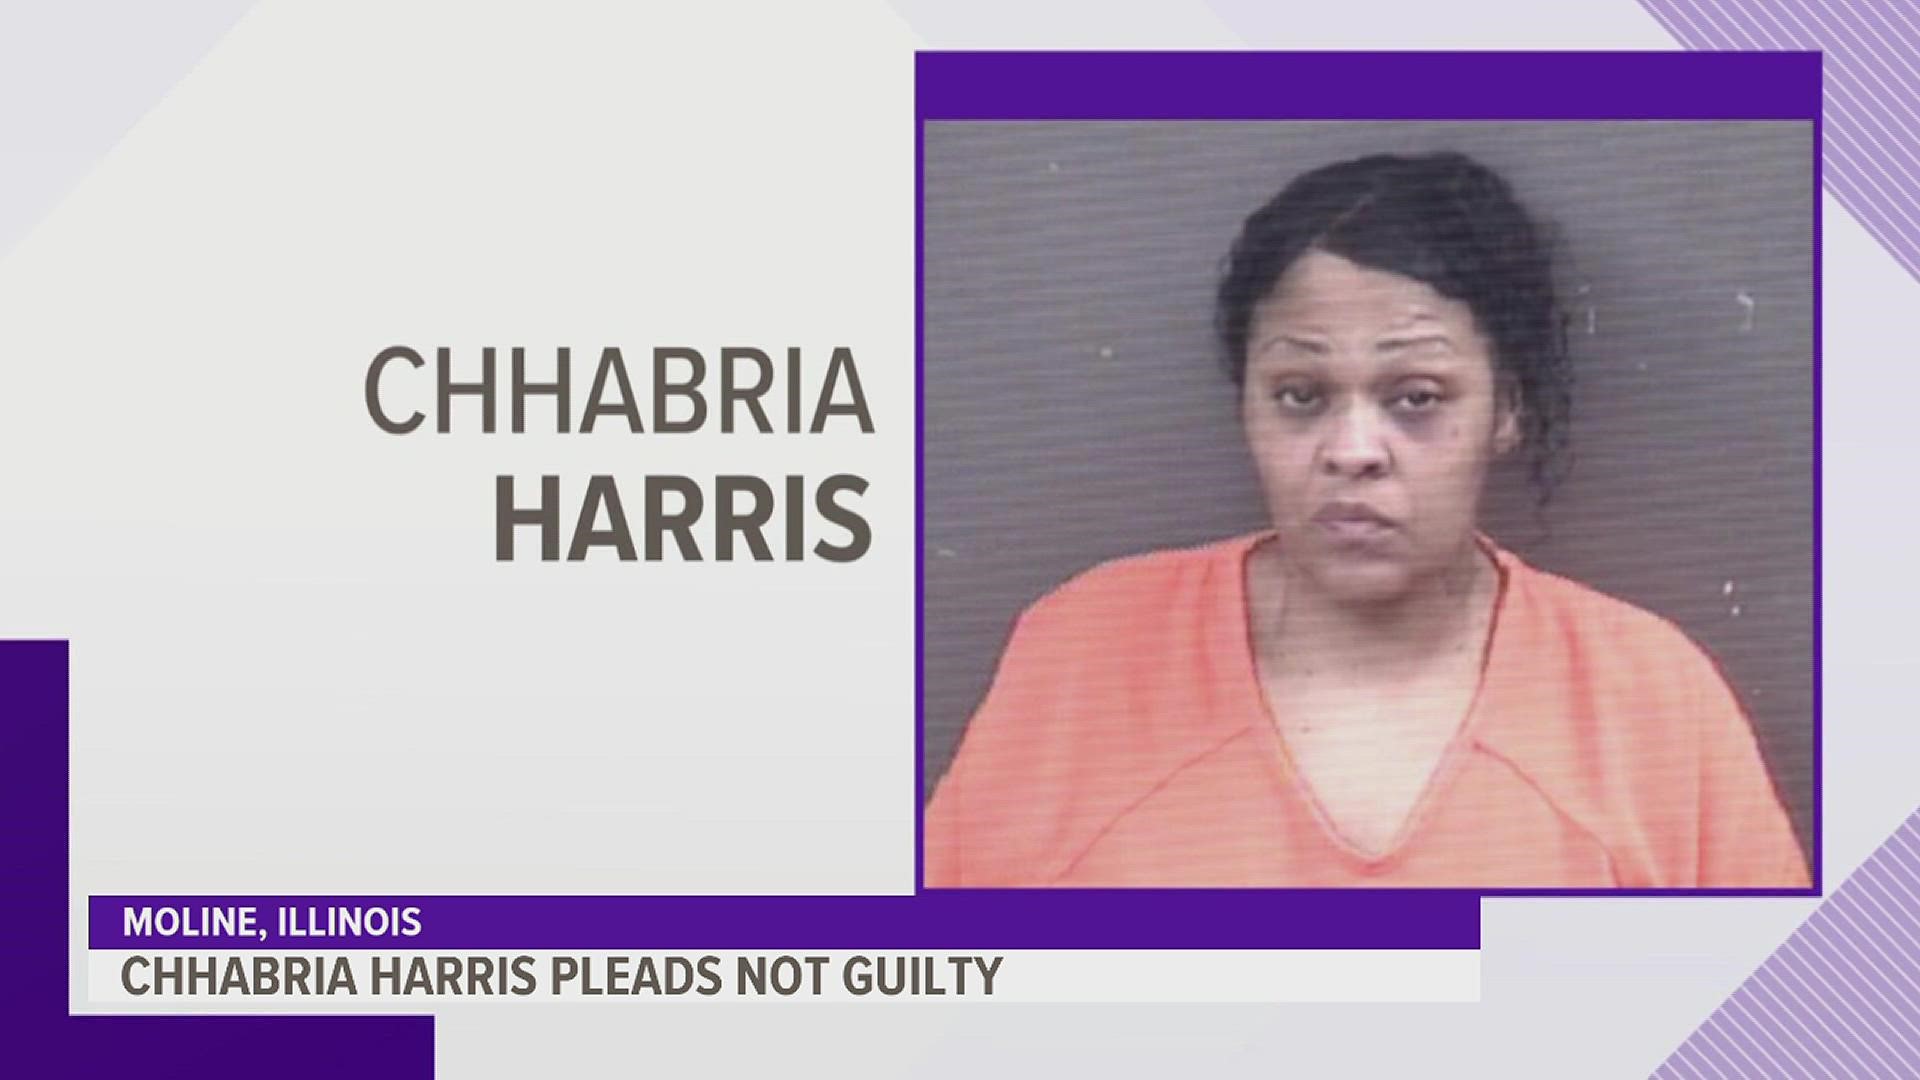 Chhabria Harris waived her preliminary hearing and entered a not guilty plea Tuesday in the crash that left two pedestrians dead.